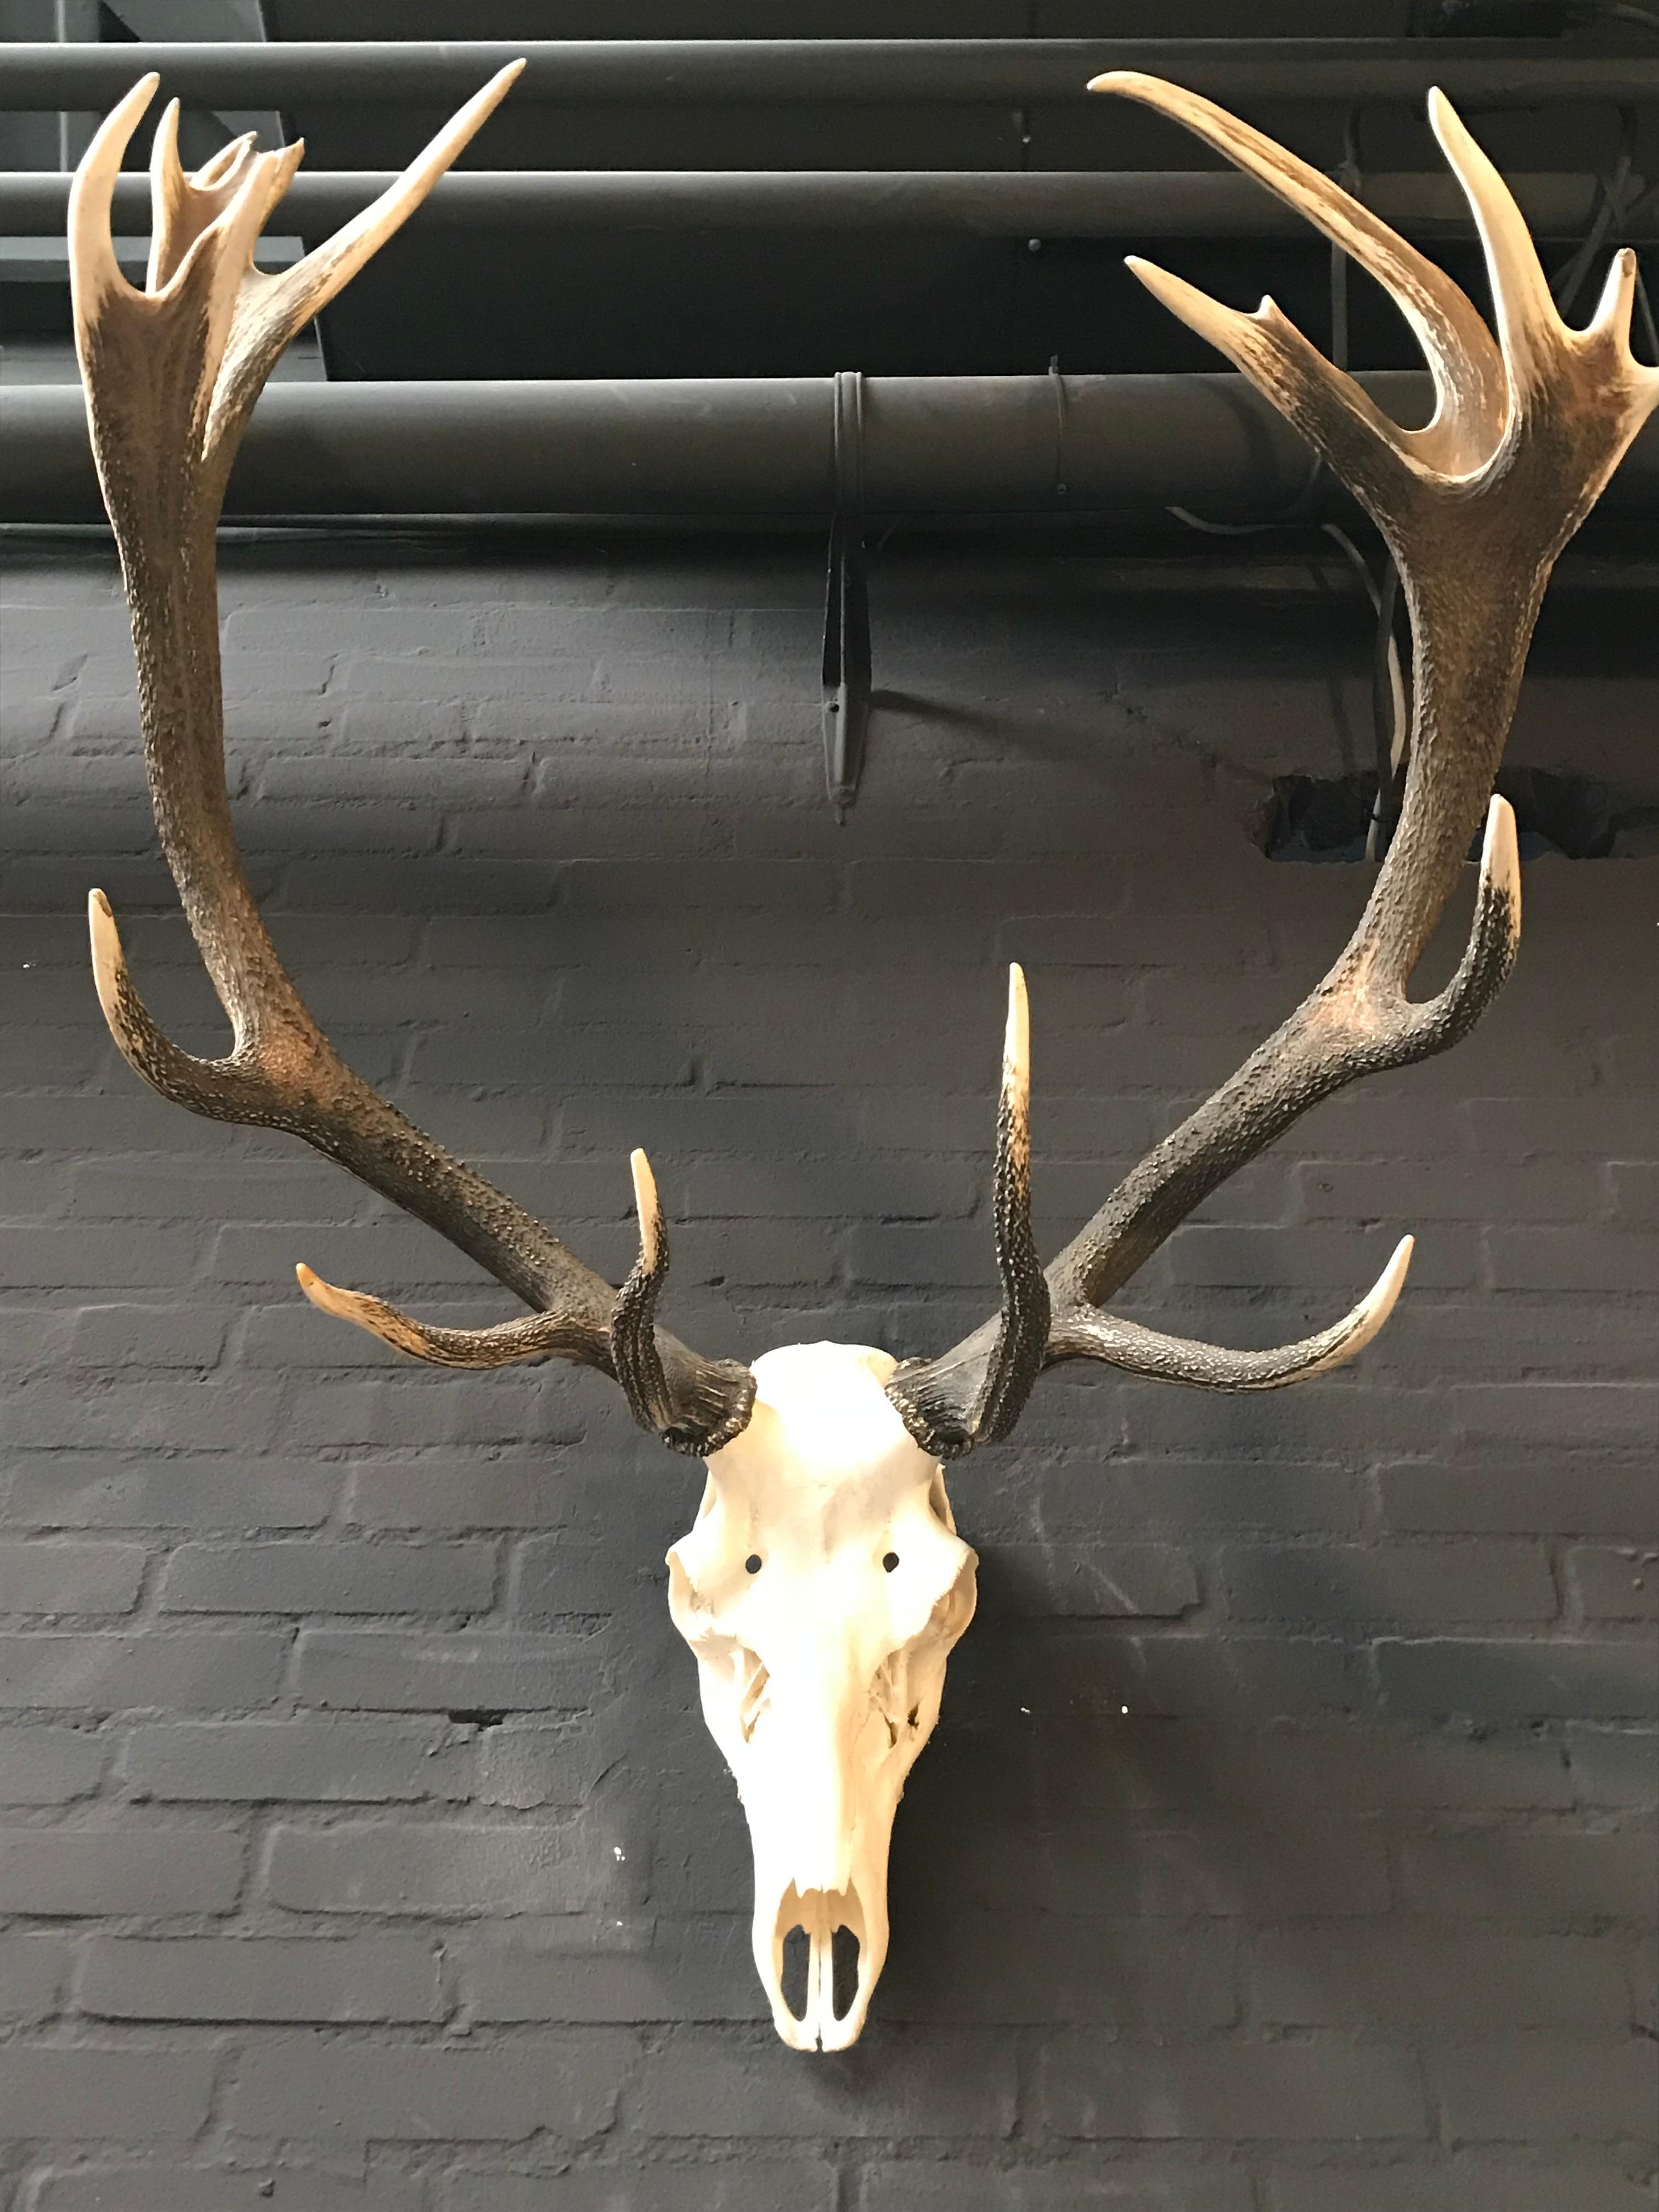 Beautifully shaped antler of a red stag. The antlers have so-called cup crowns which makes it very unique.